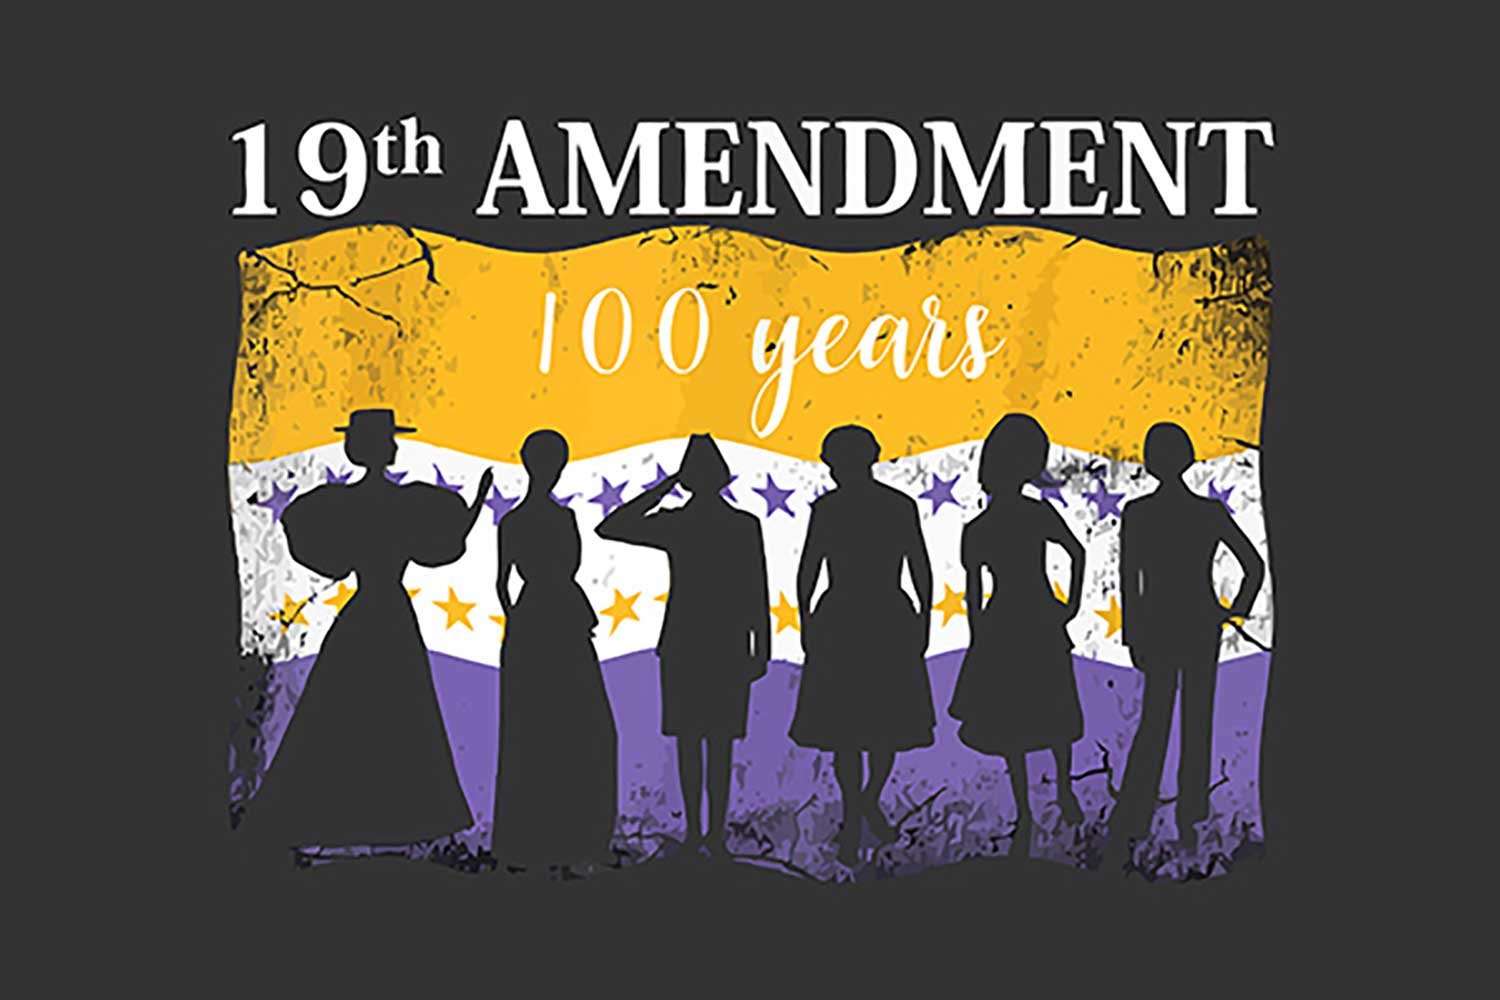 Silhouettes of women from different periods of history are shown under text that reads "19th Amendment 100 years"